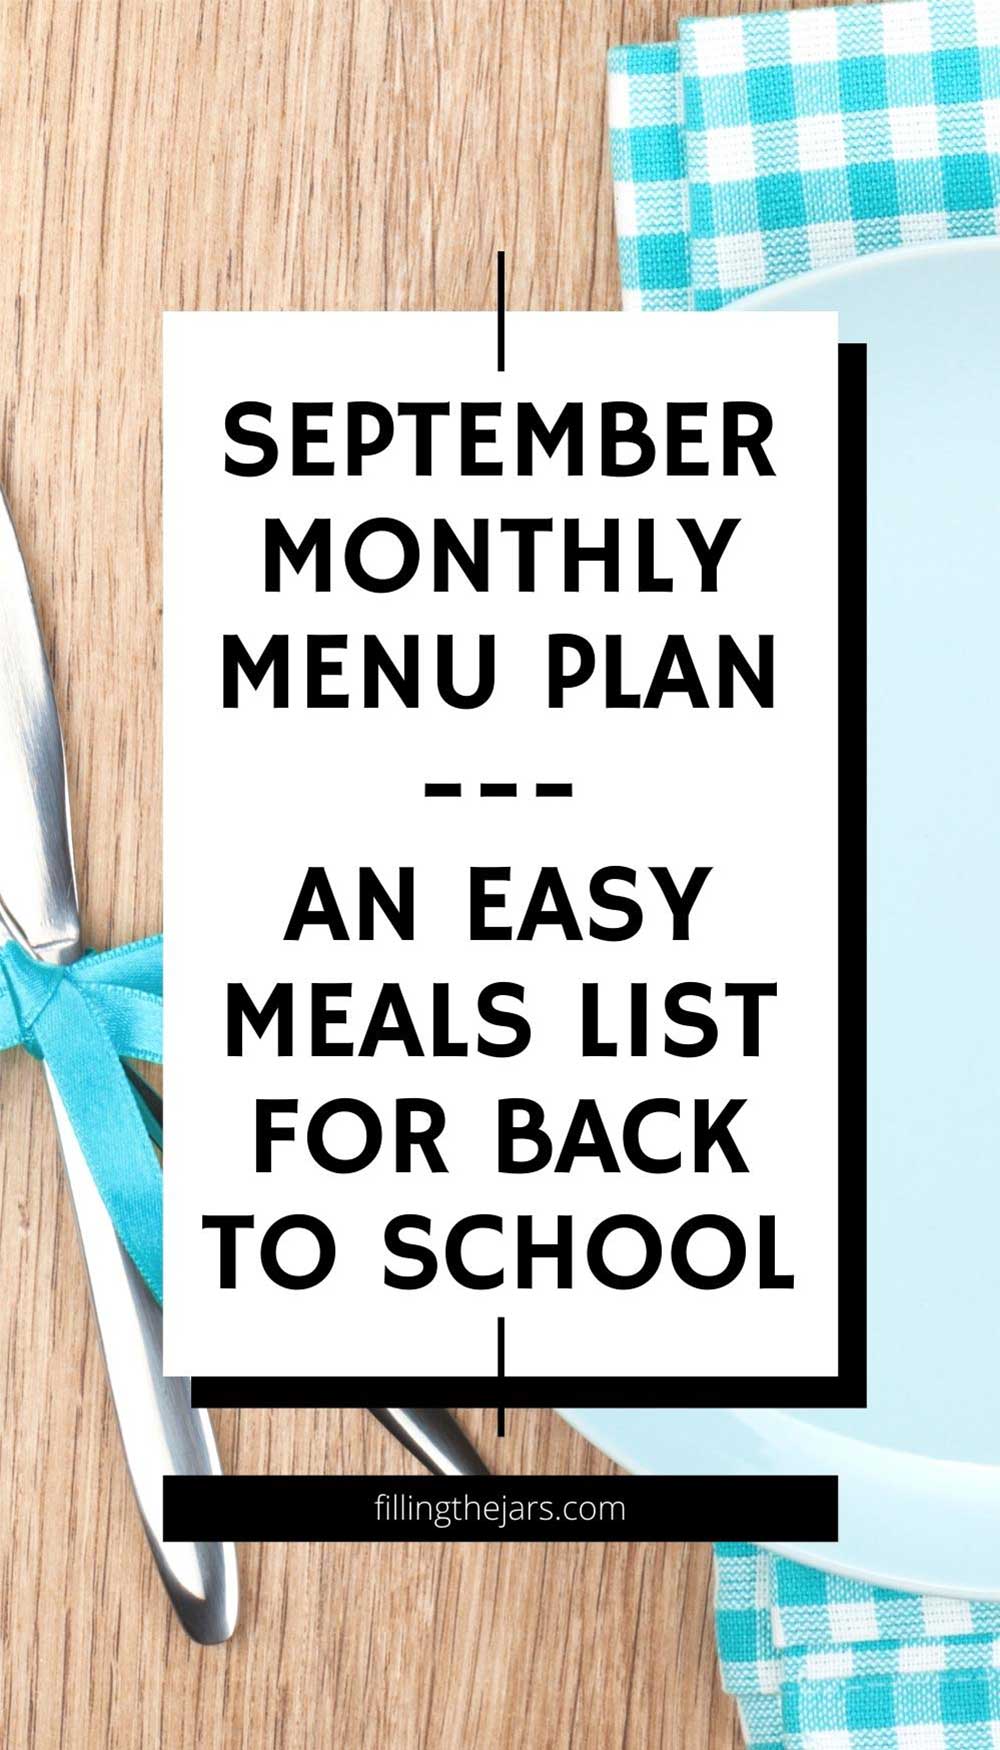 Text September monthly menu plan an easy meals list for back to school on white background over blue plate and napkin on wood table.